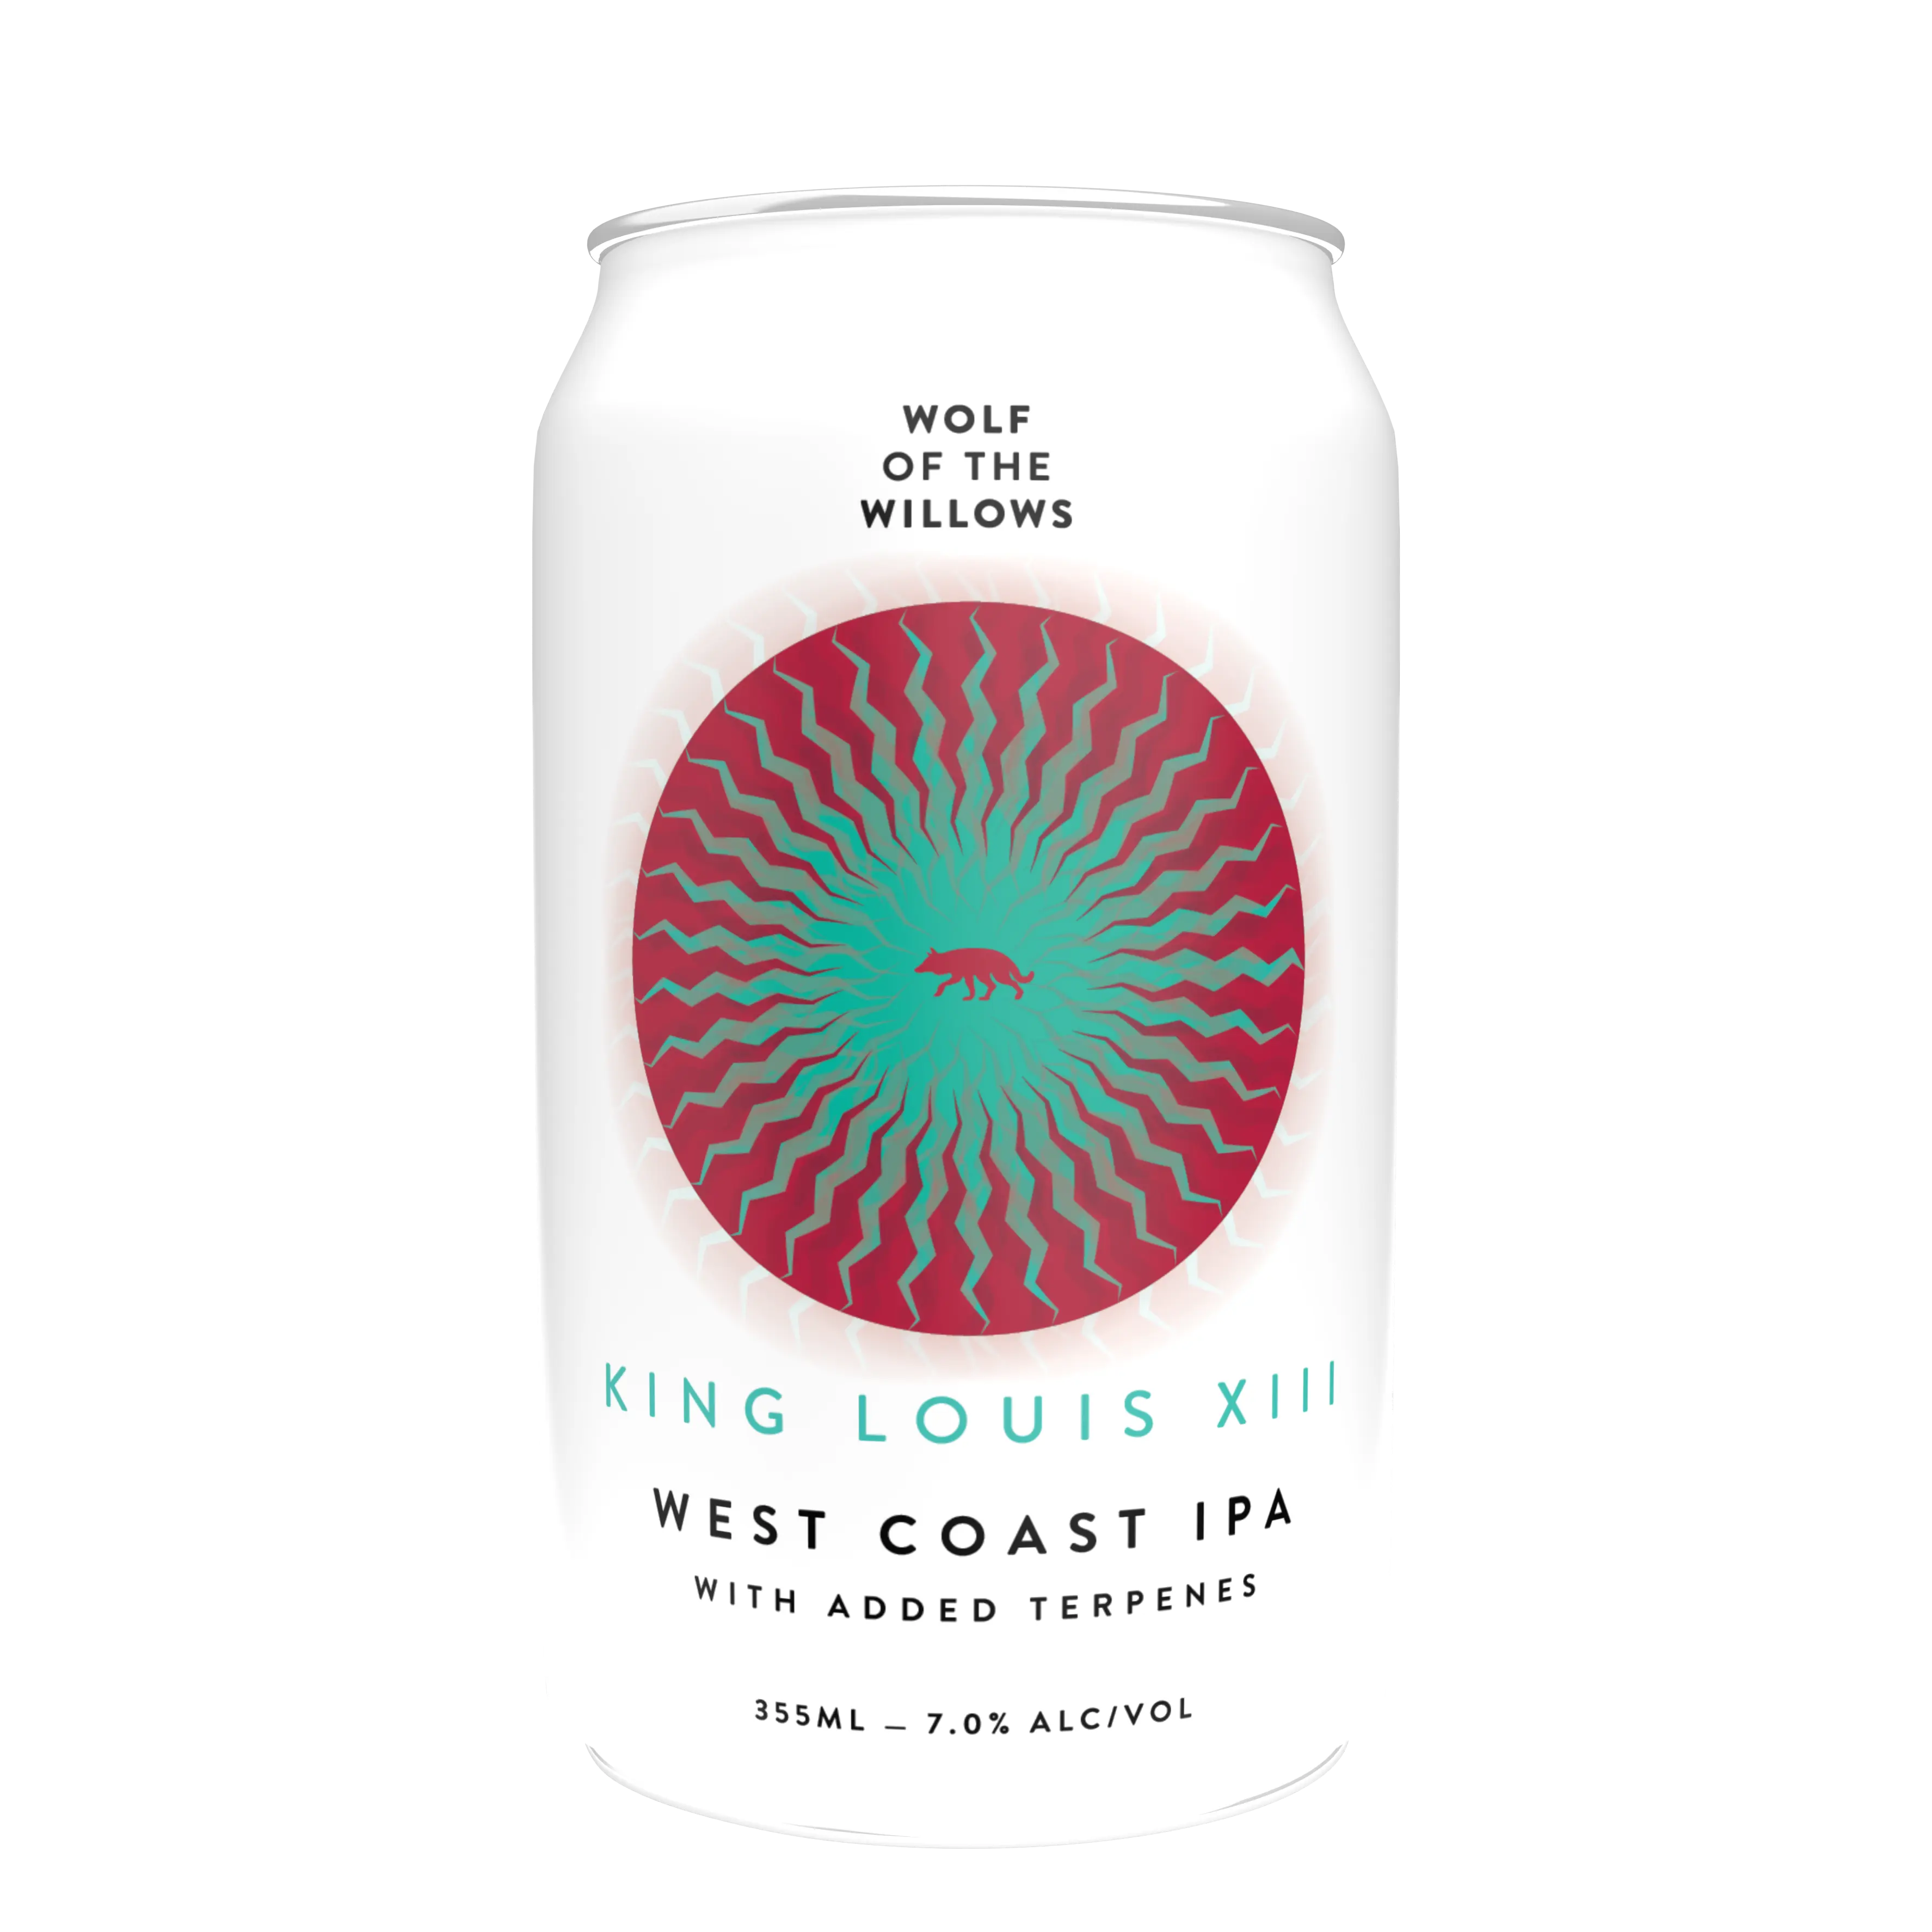 Can of King Louis XIII West Coast IPA by Wolf of the Willows